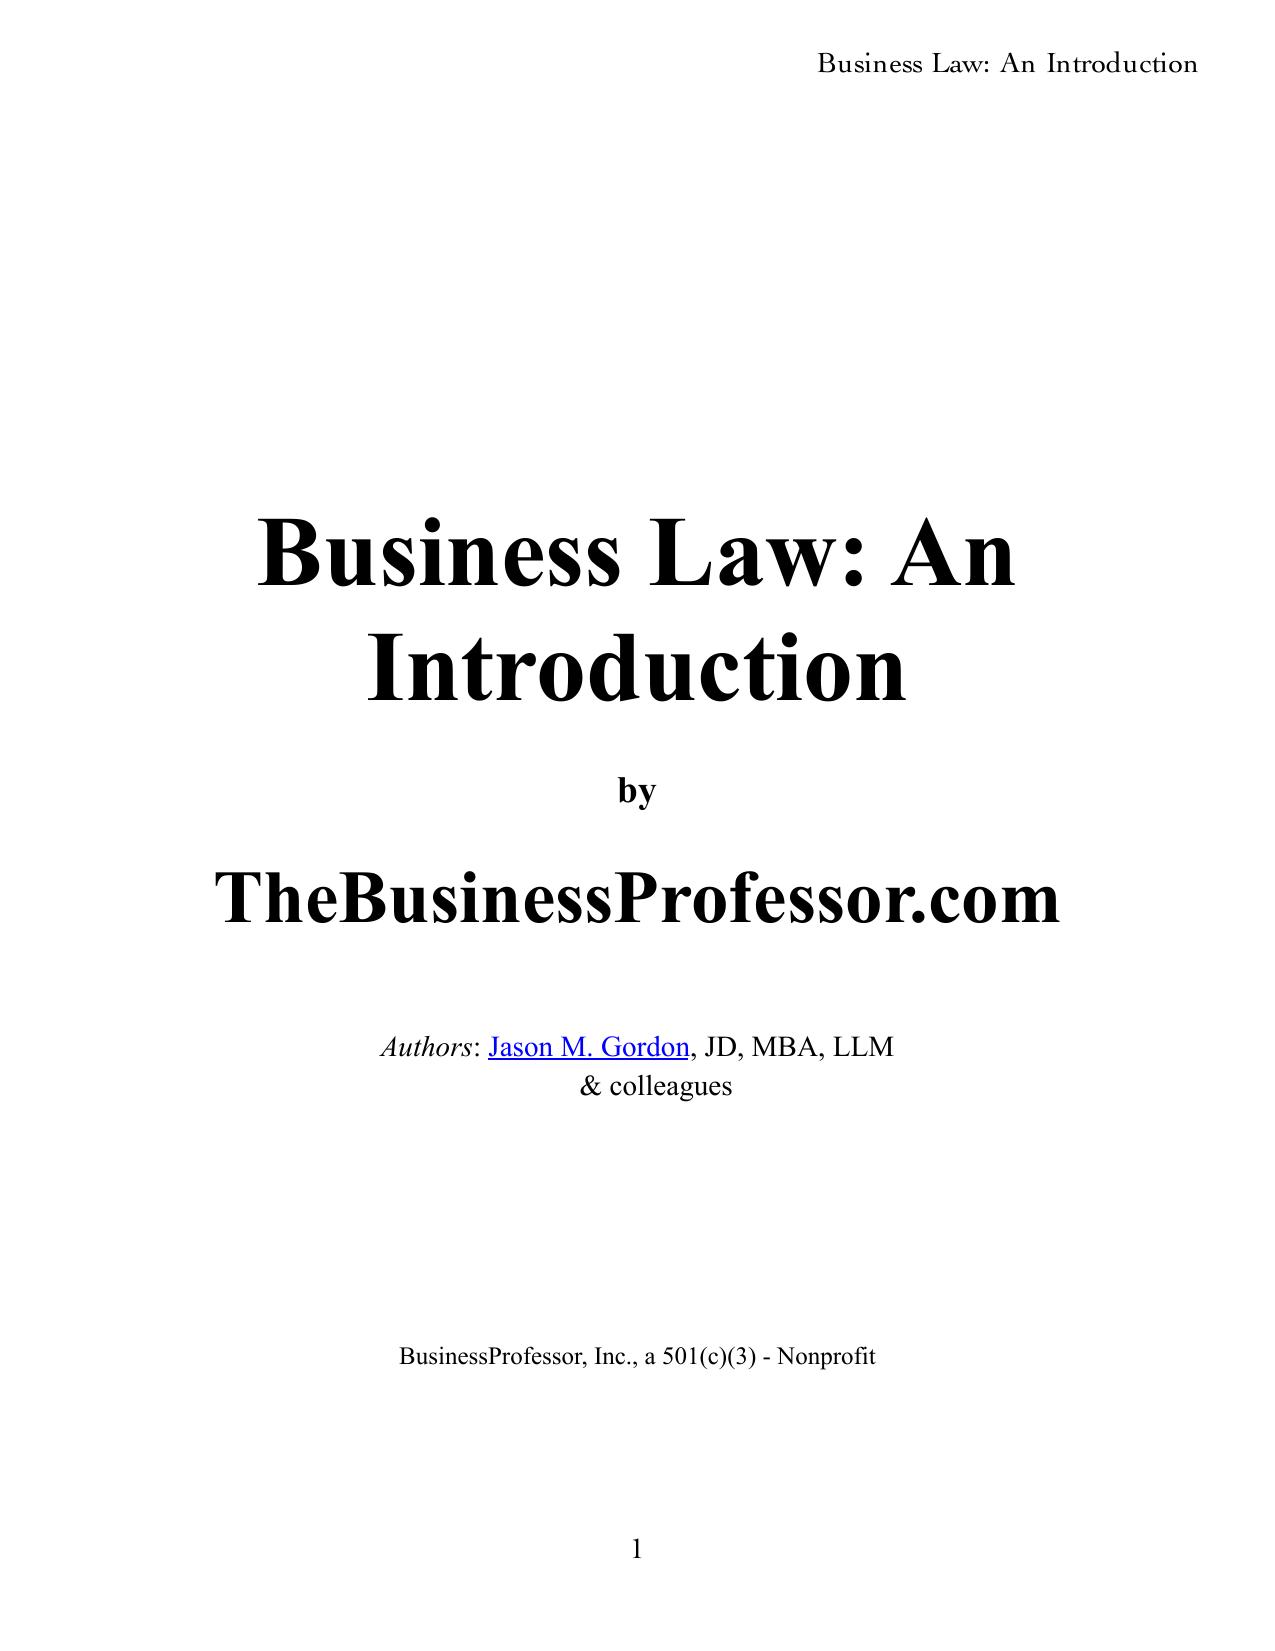 Business Law- An Introduction